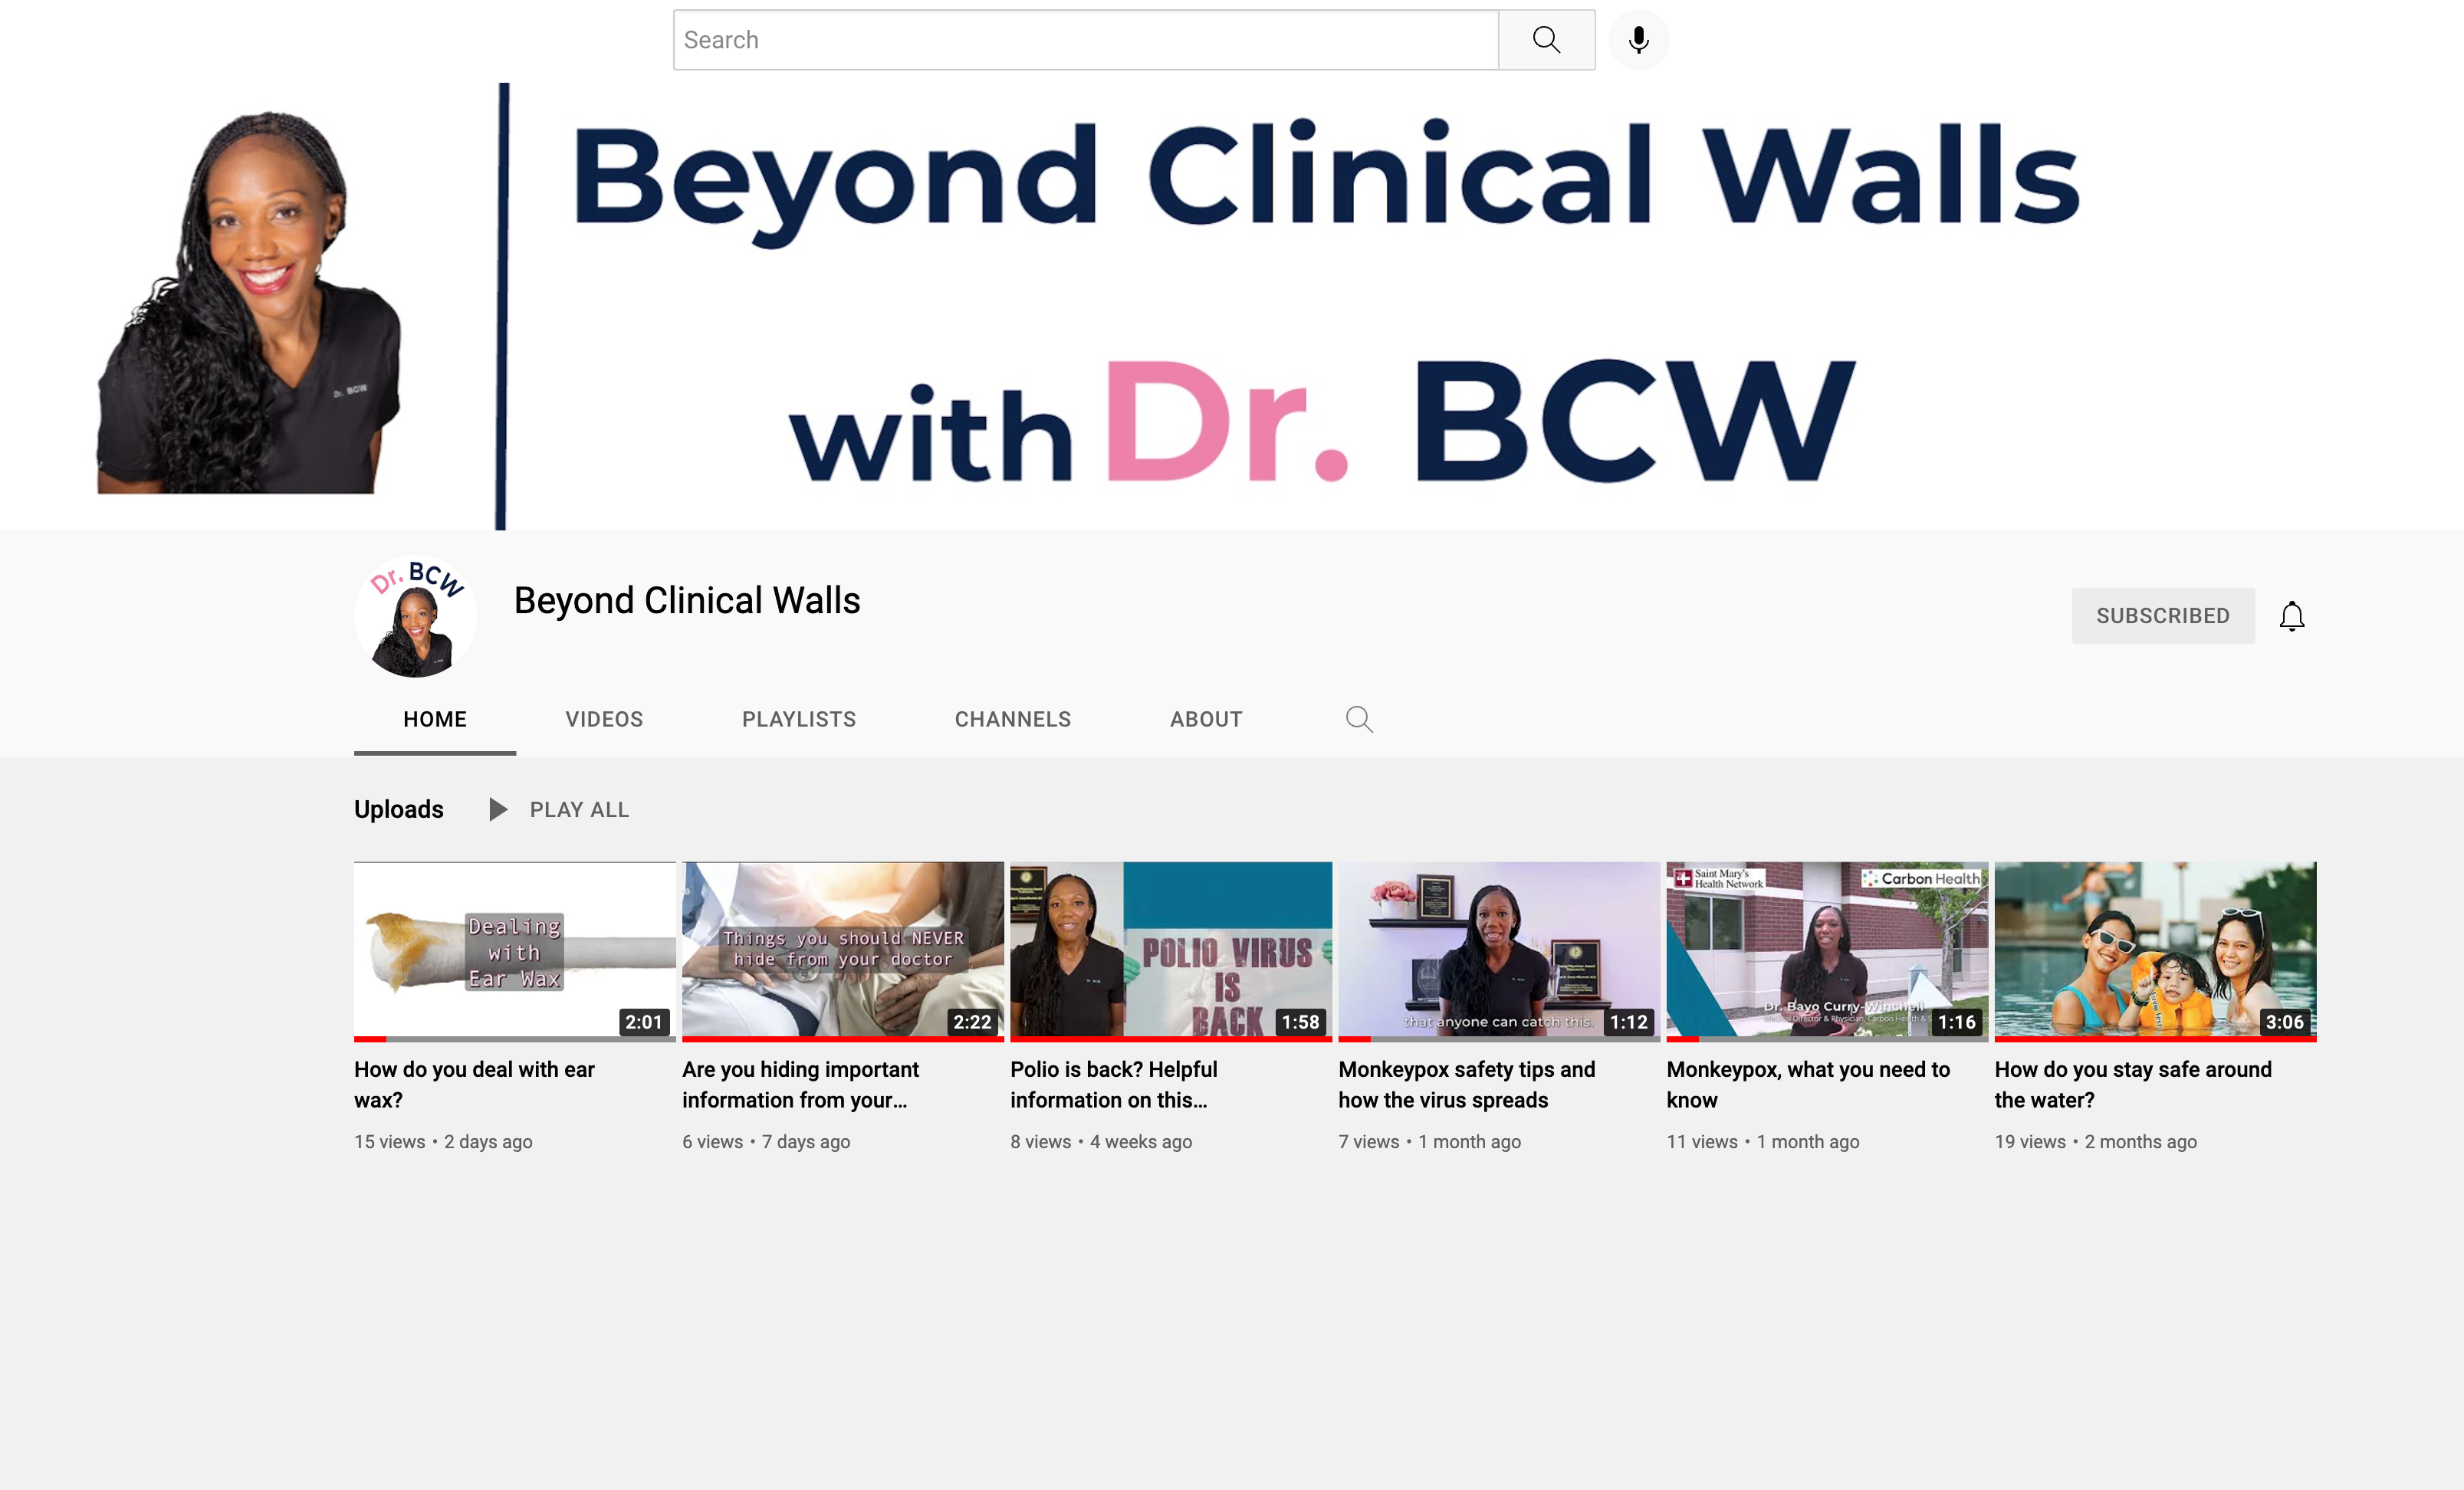 Beyond Clinical Walls Live on YouTube!